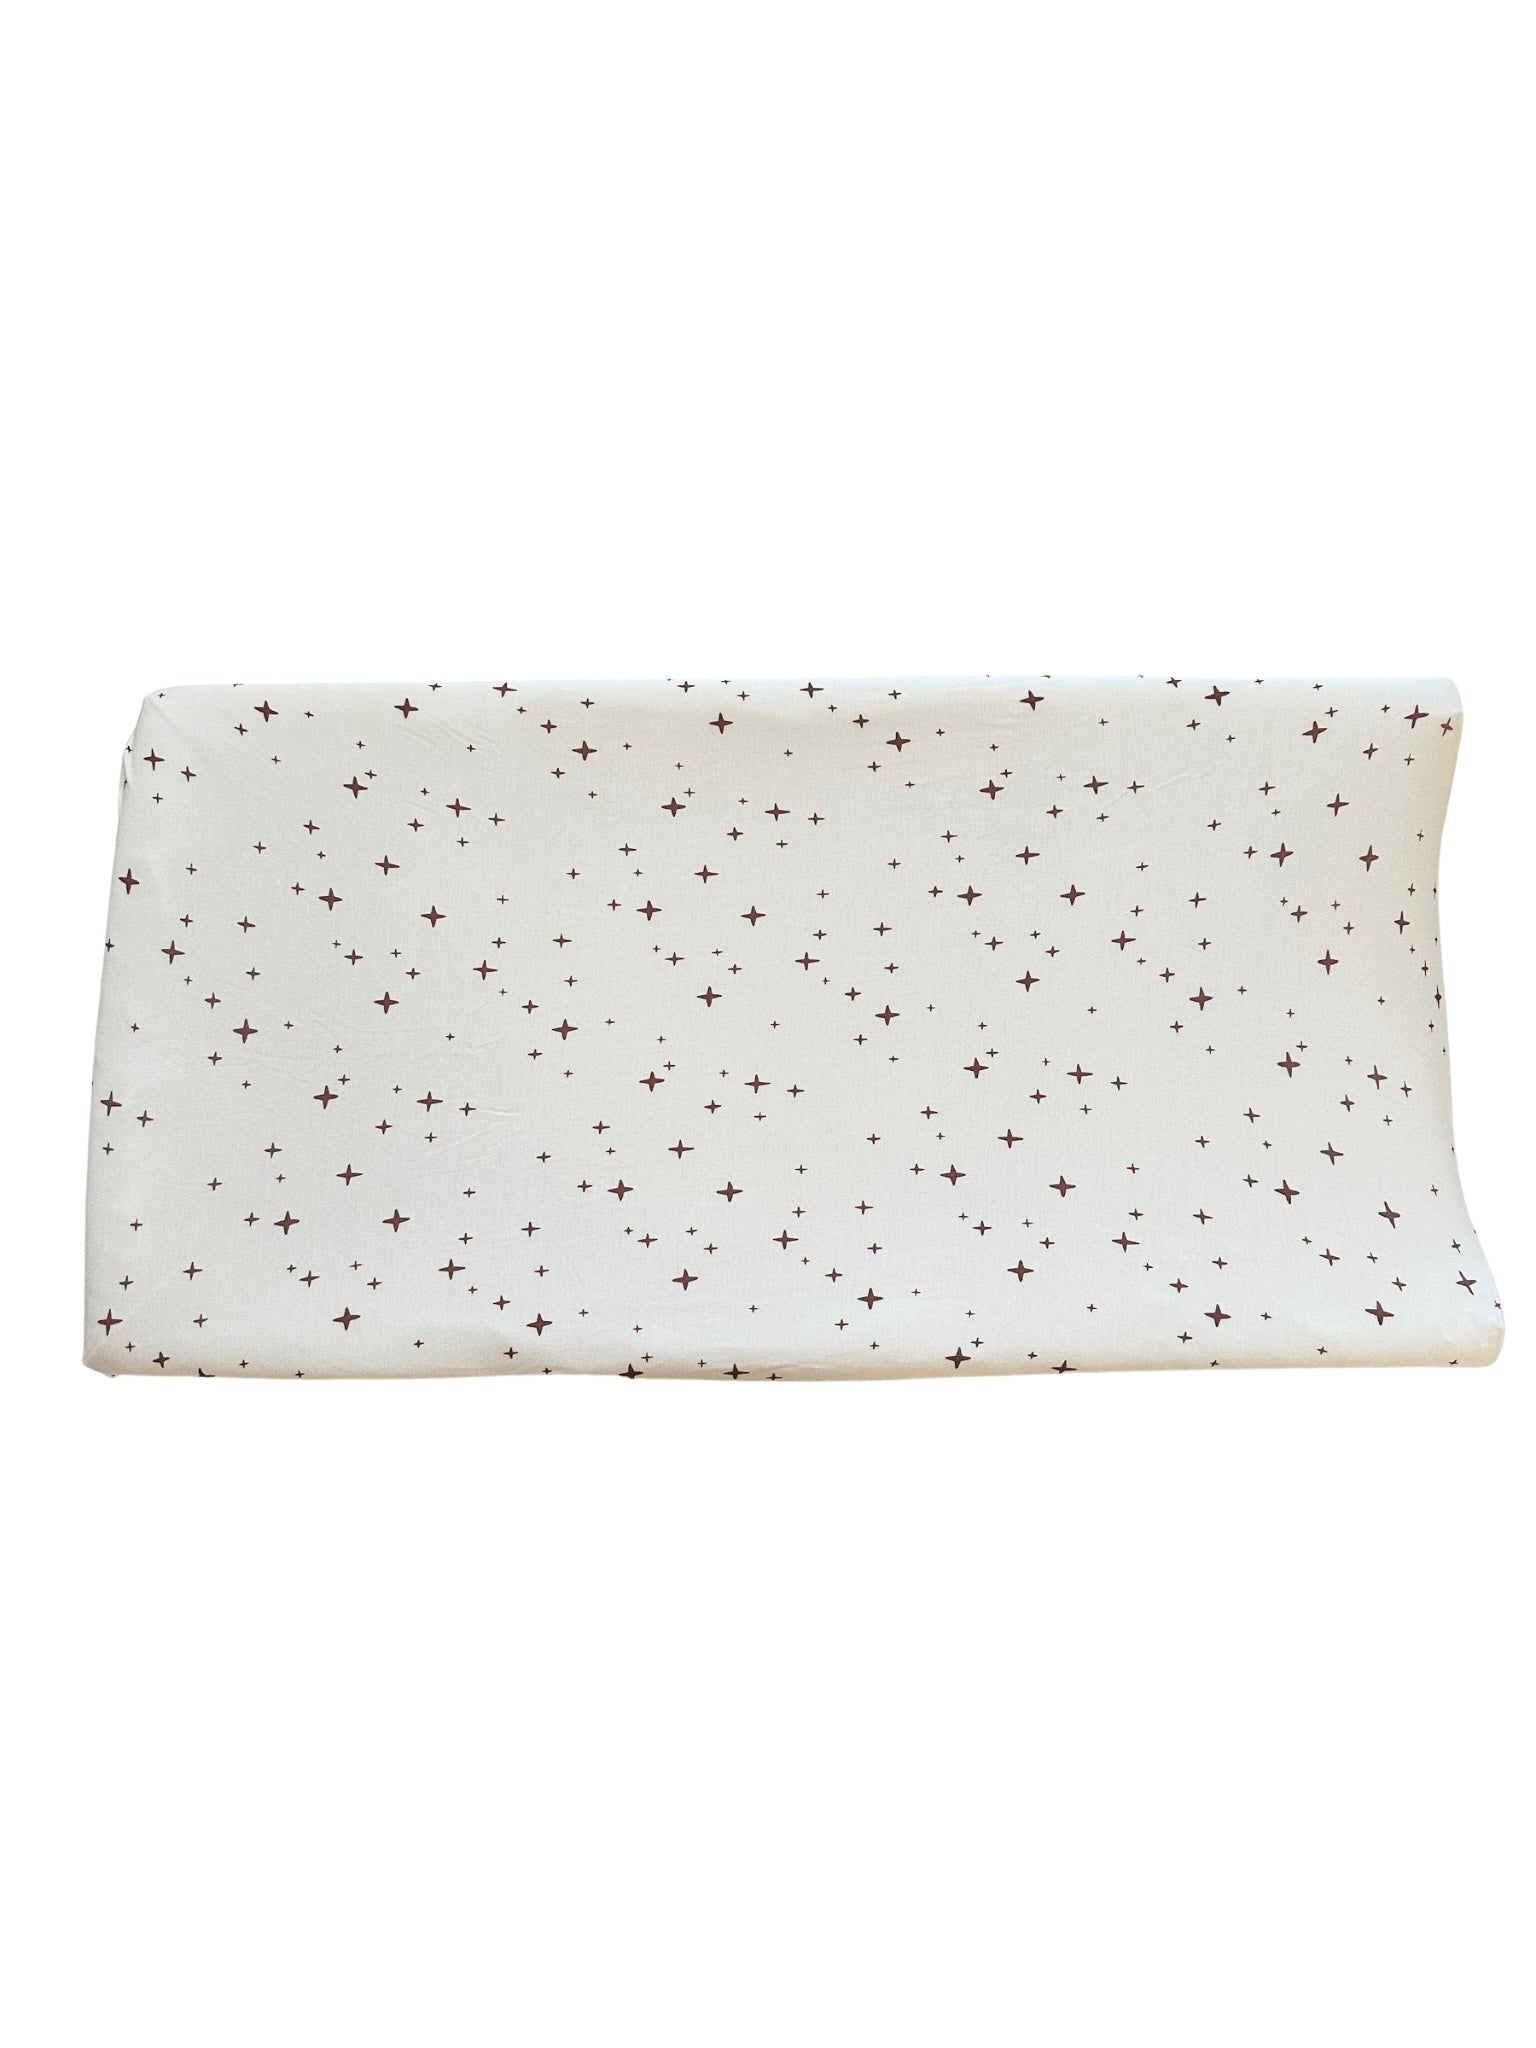 Bamboo Premium Changing Pad Cover - Brown Stars - Harp Angel Boutique